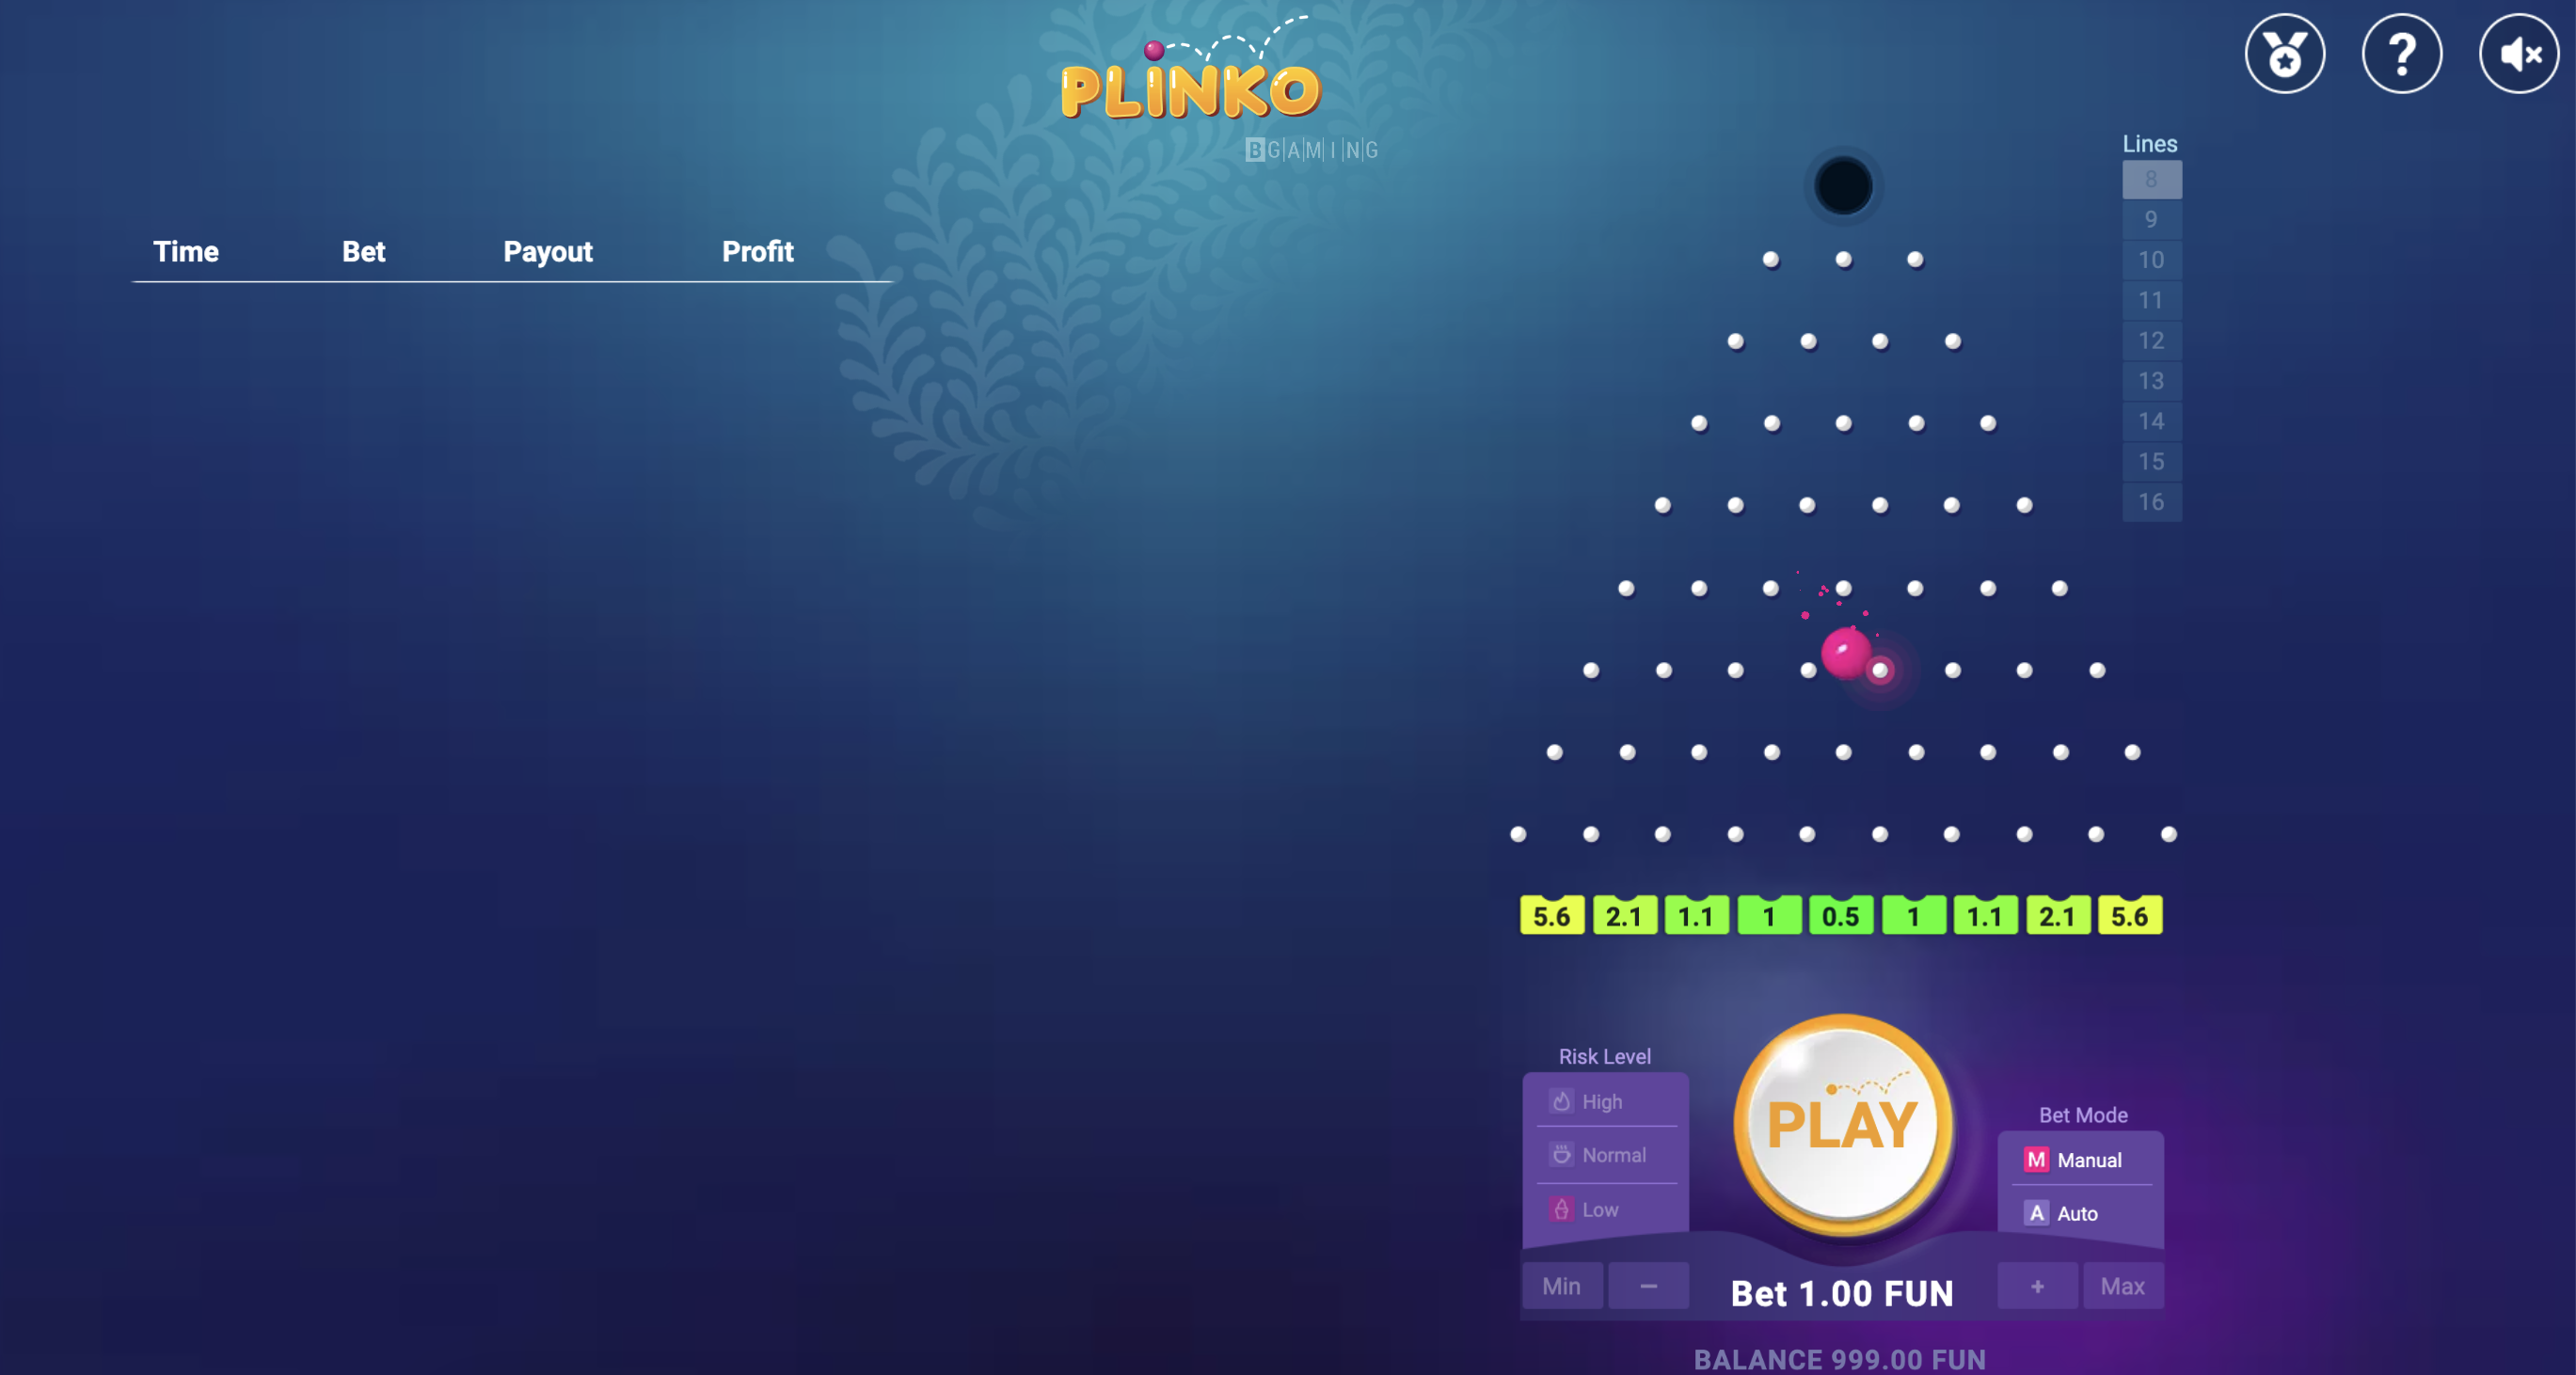 Graphics and interface of the game Plinko